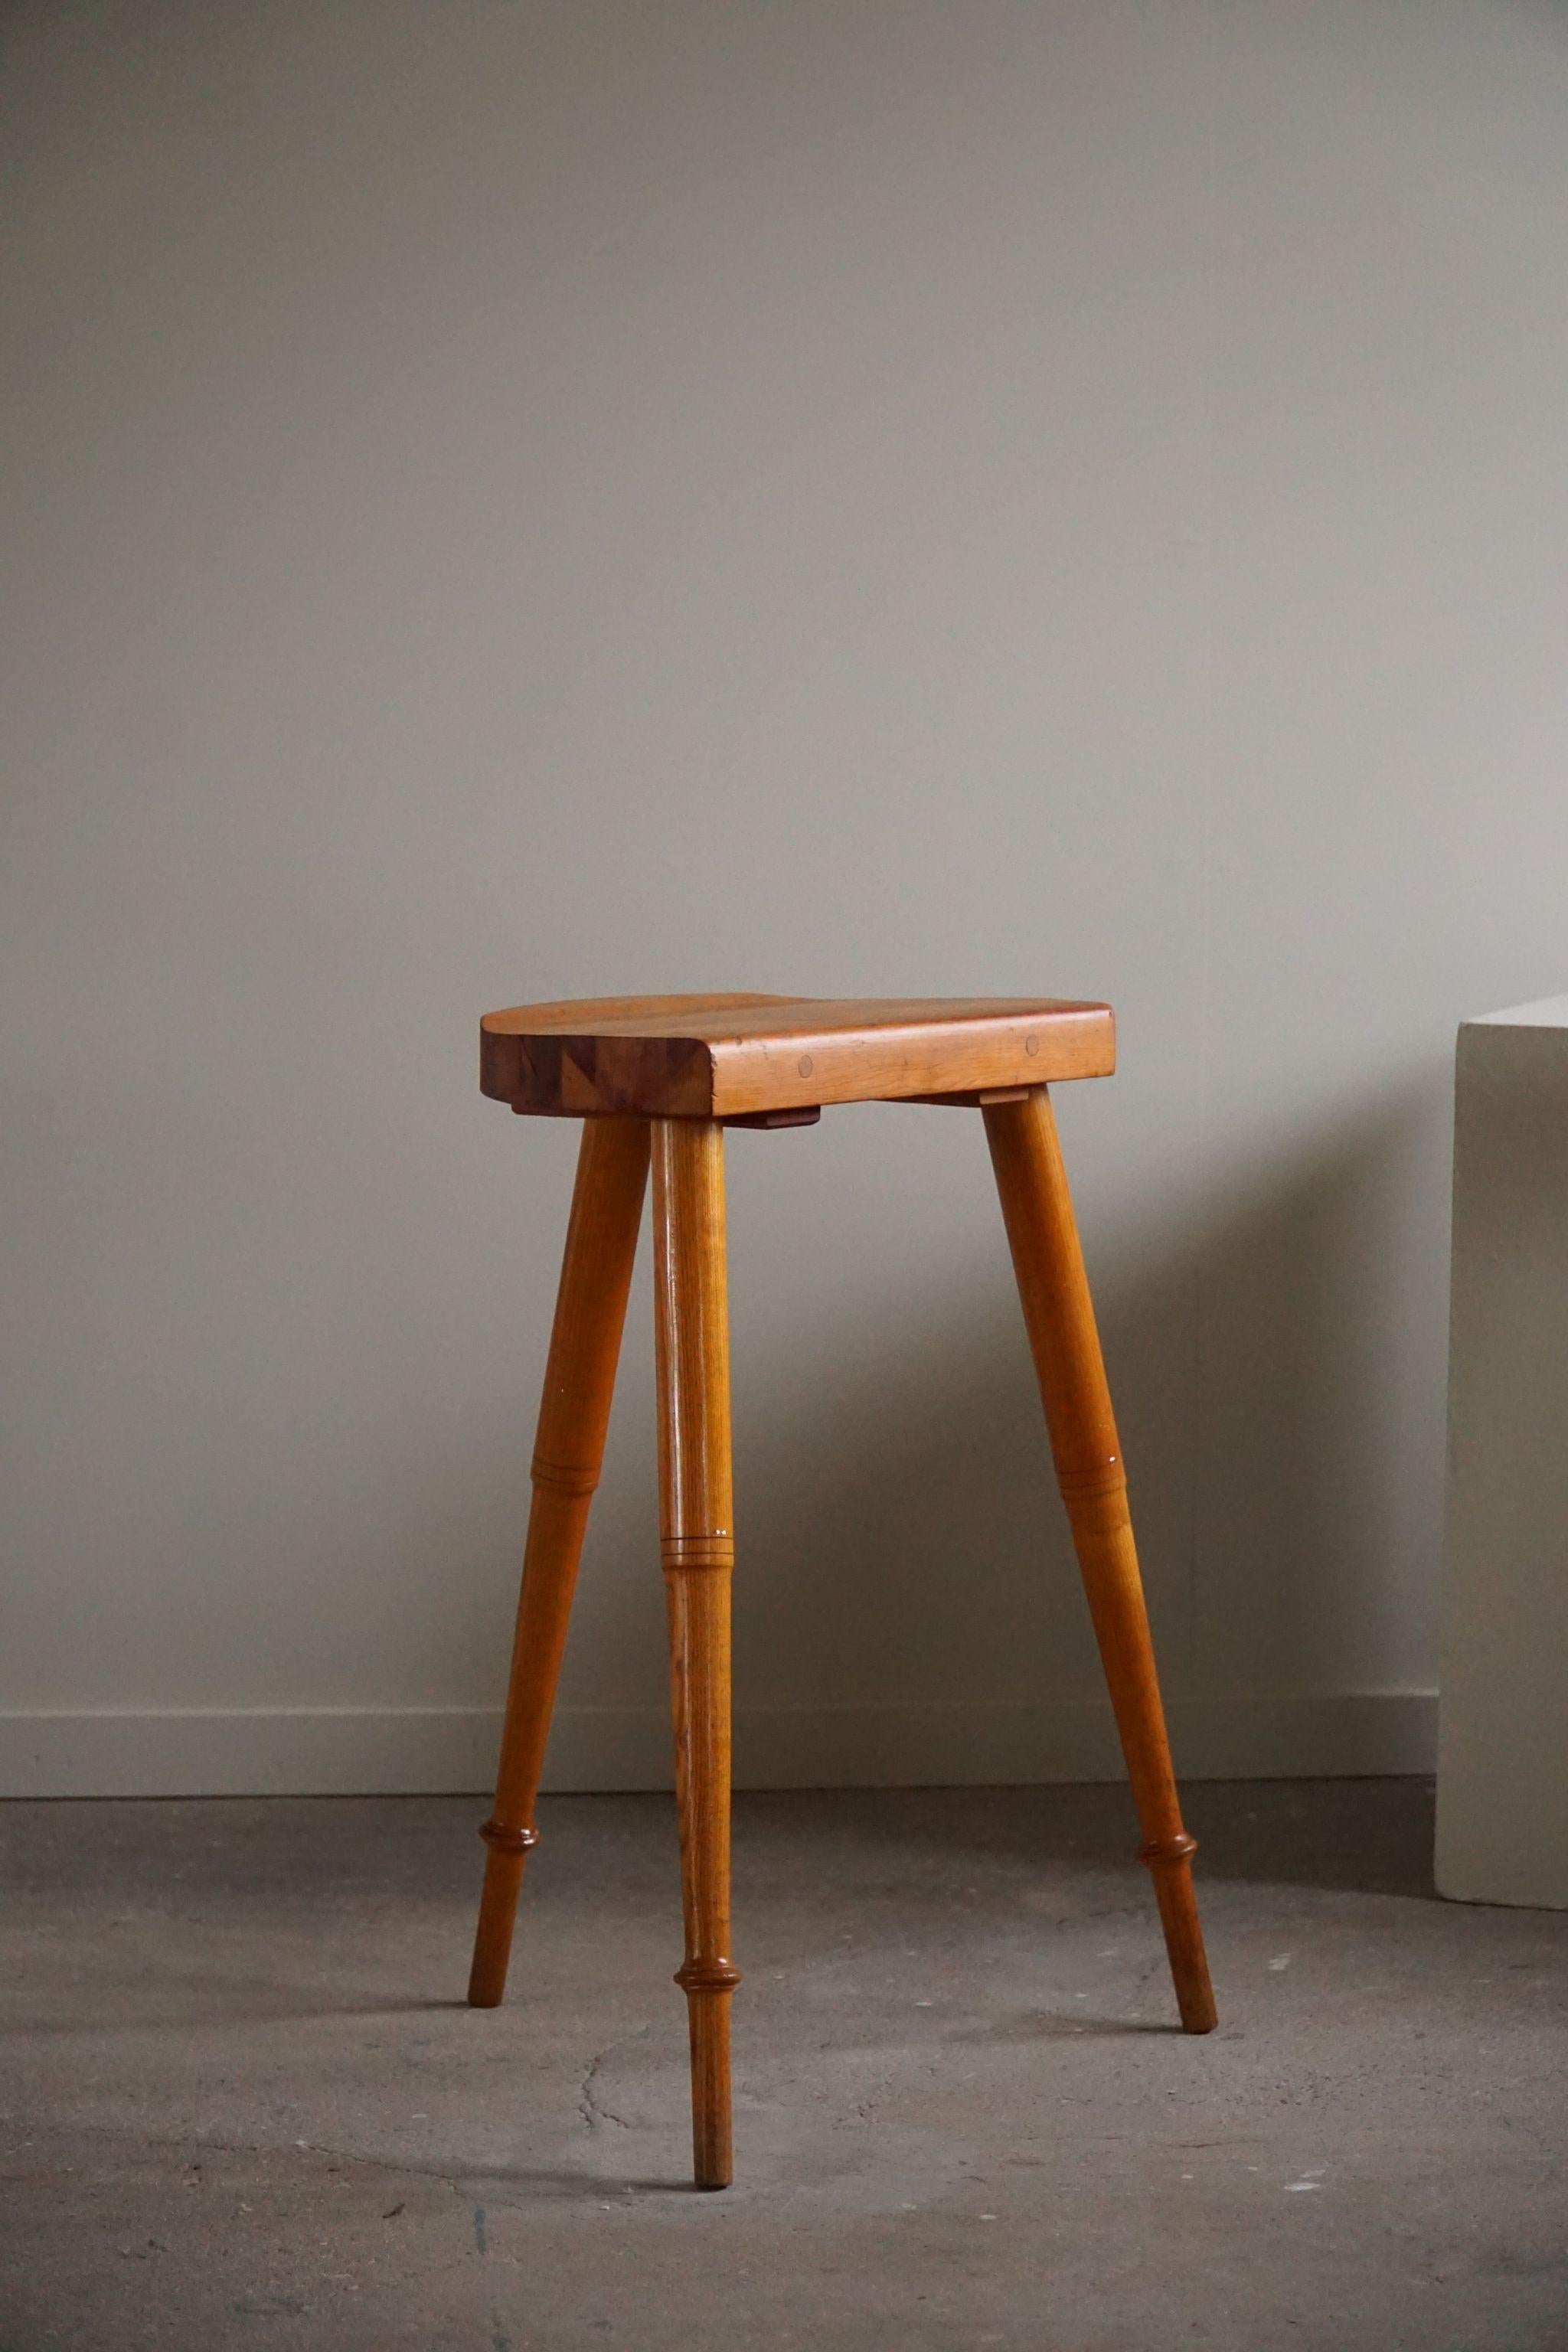 Highly decorative tall stool in solid pine. Made by a Danish cabinetmaker in 1960s. 

This modern stool will fit in many types of home decors. Perfectly suited for a Classic, Wabi Sabi, Scandinavian or an Art Deco interior style.

A great